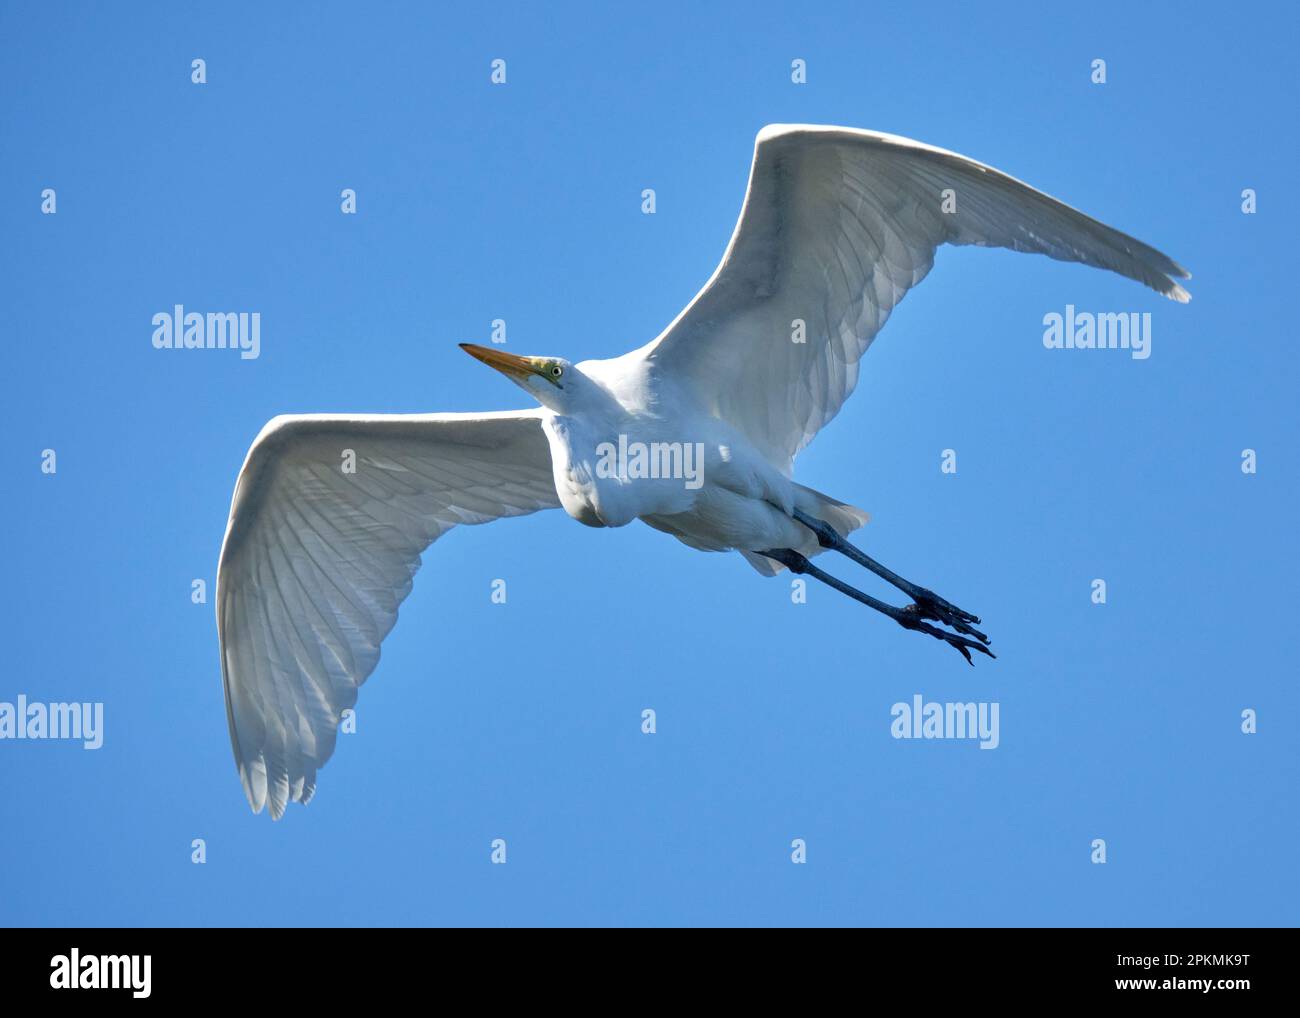 A close-up of a white Great Egret soaring, with its wings spread, above a beach in Costa Rica with a bright blue sky background. Stock Photo